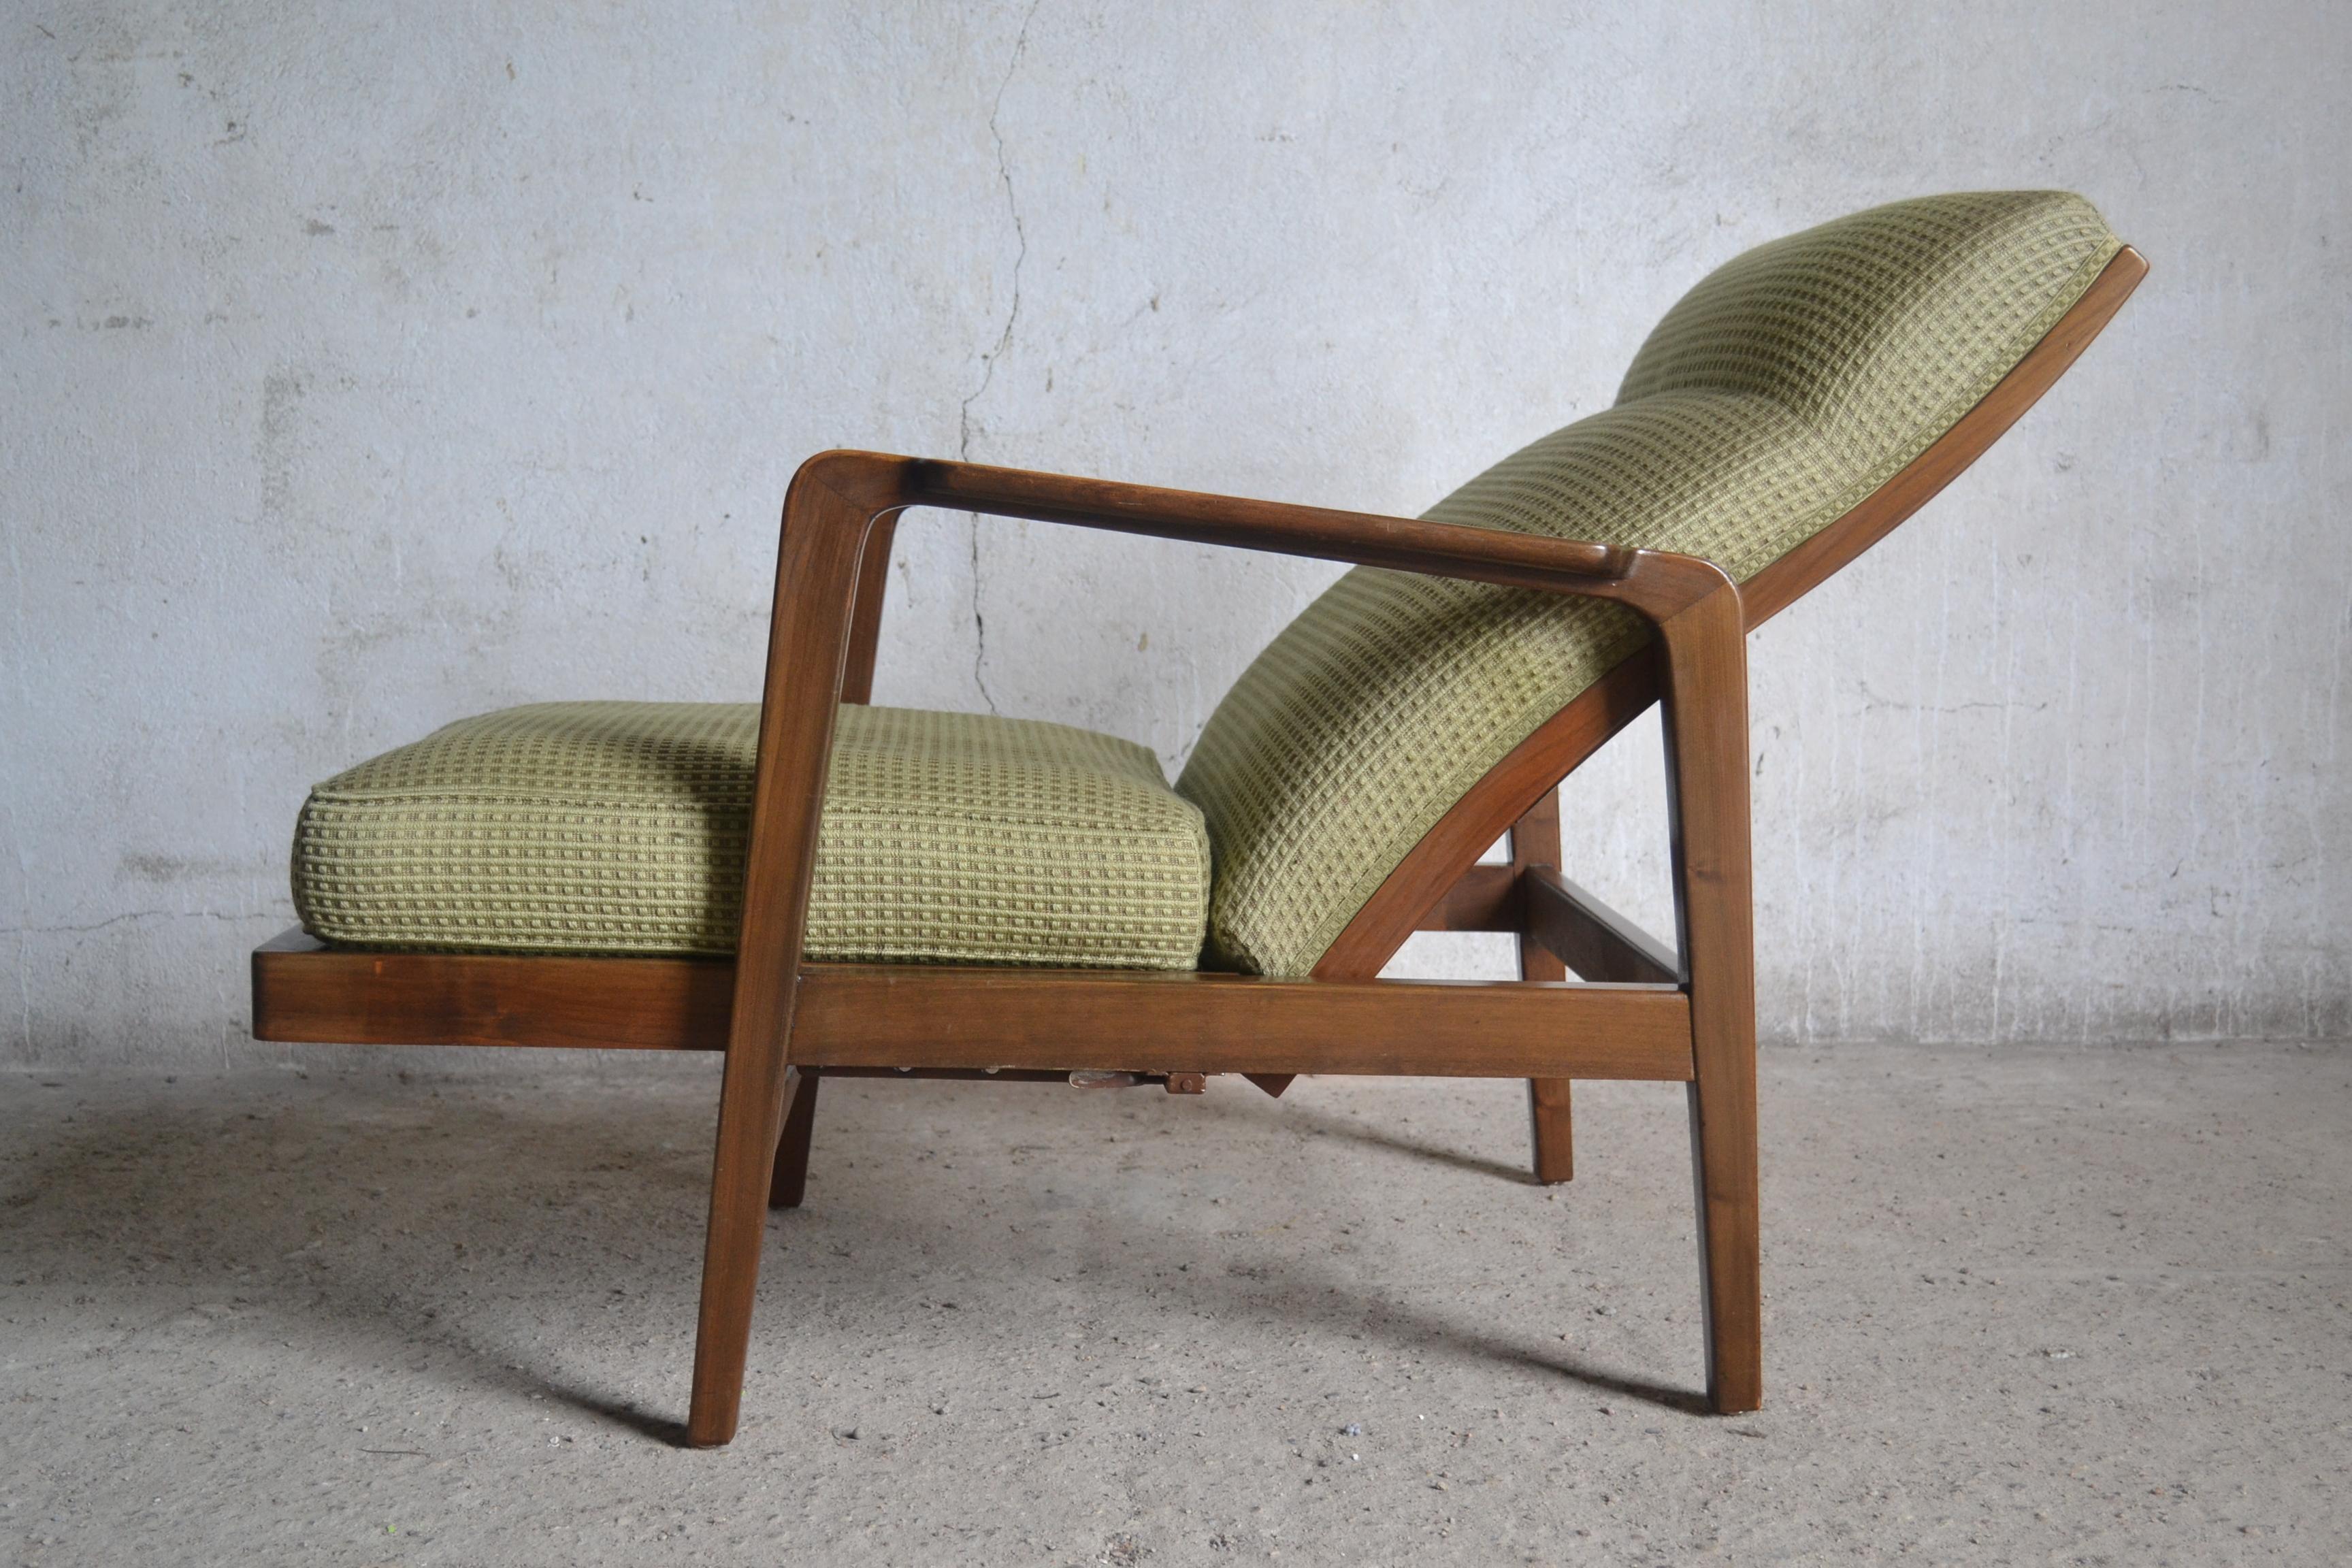 - Knoll Antimott chair from the 1950s
- Remains in original condition
- Has a five-point adjustable seat release.